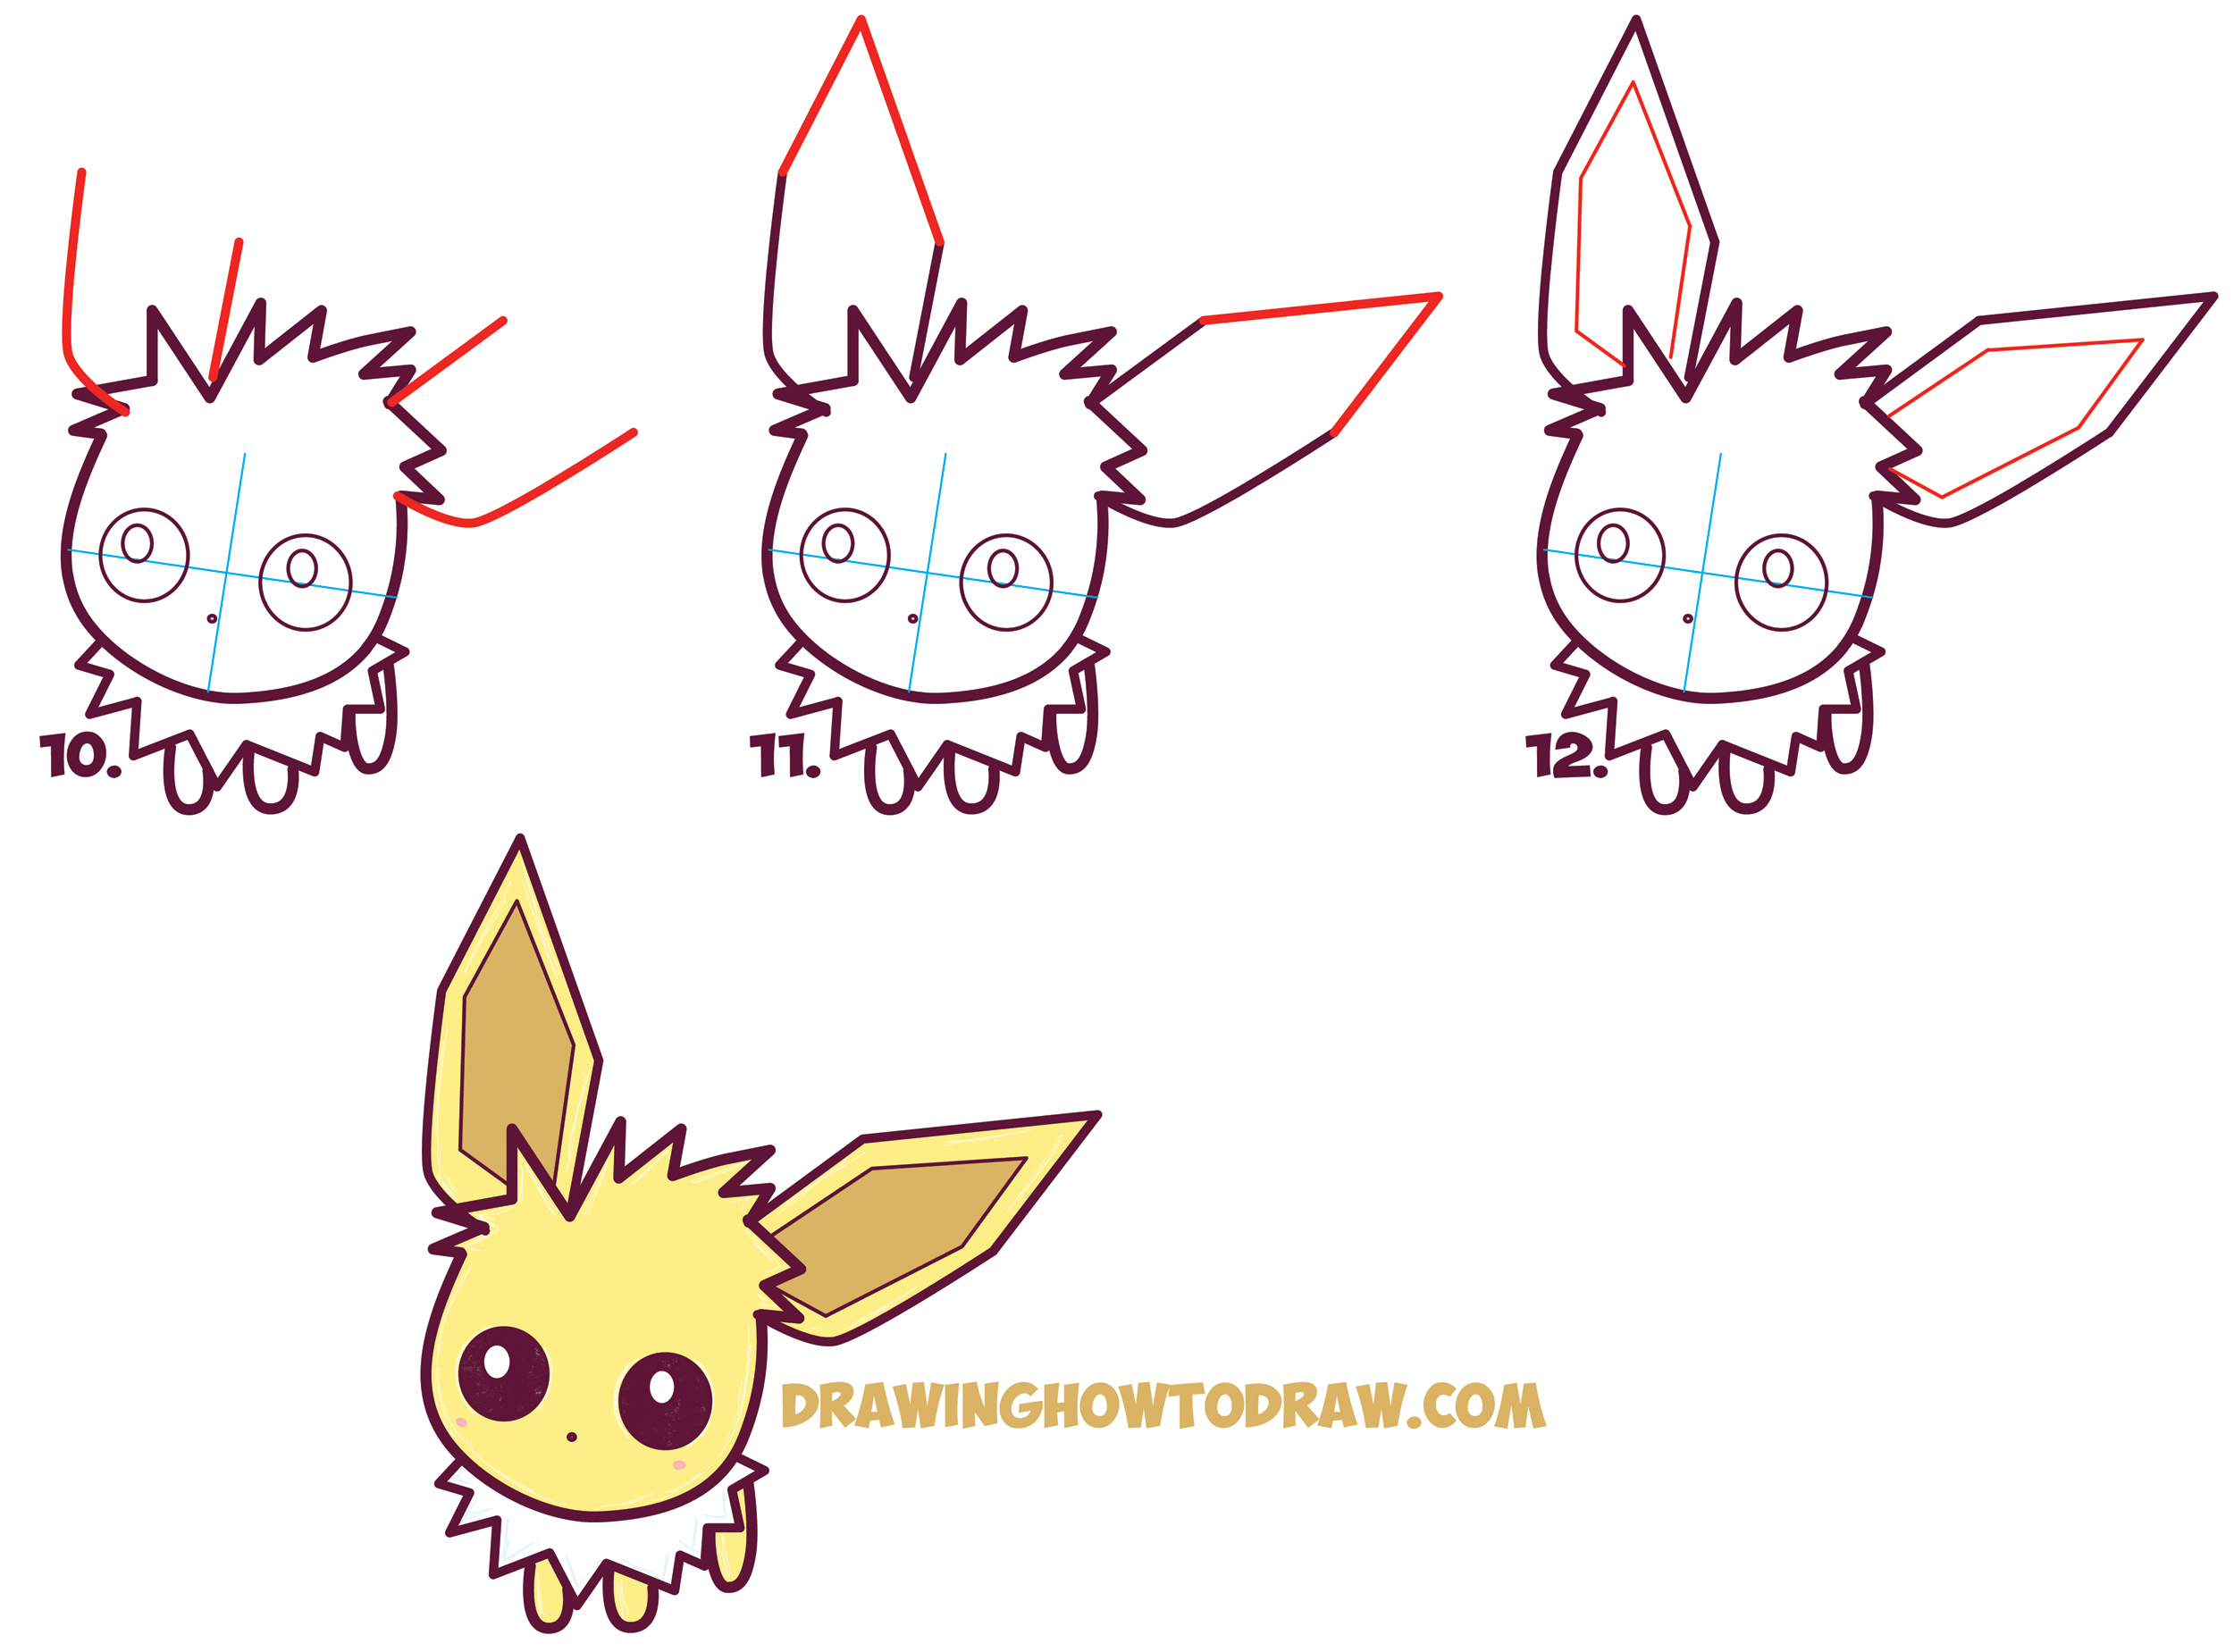 How to Draw Cute / Kawaii / Chibi Jolteon from Pokemon Easy Step by